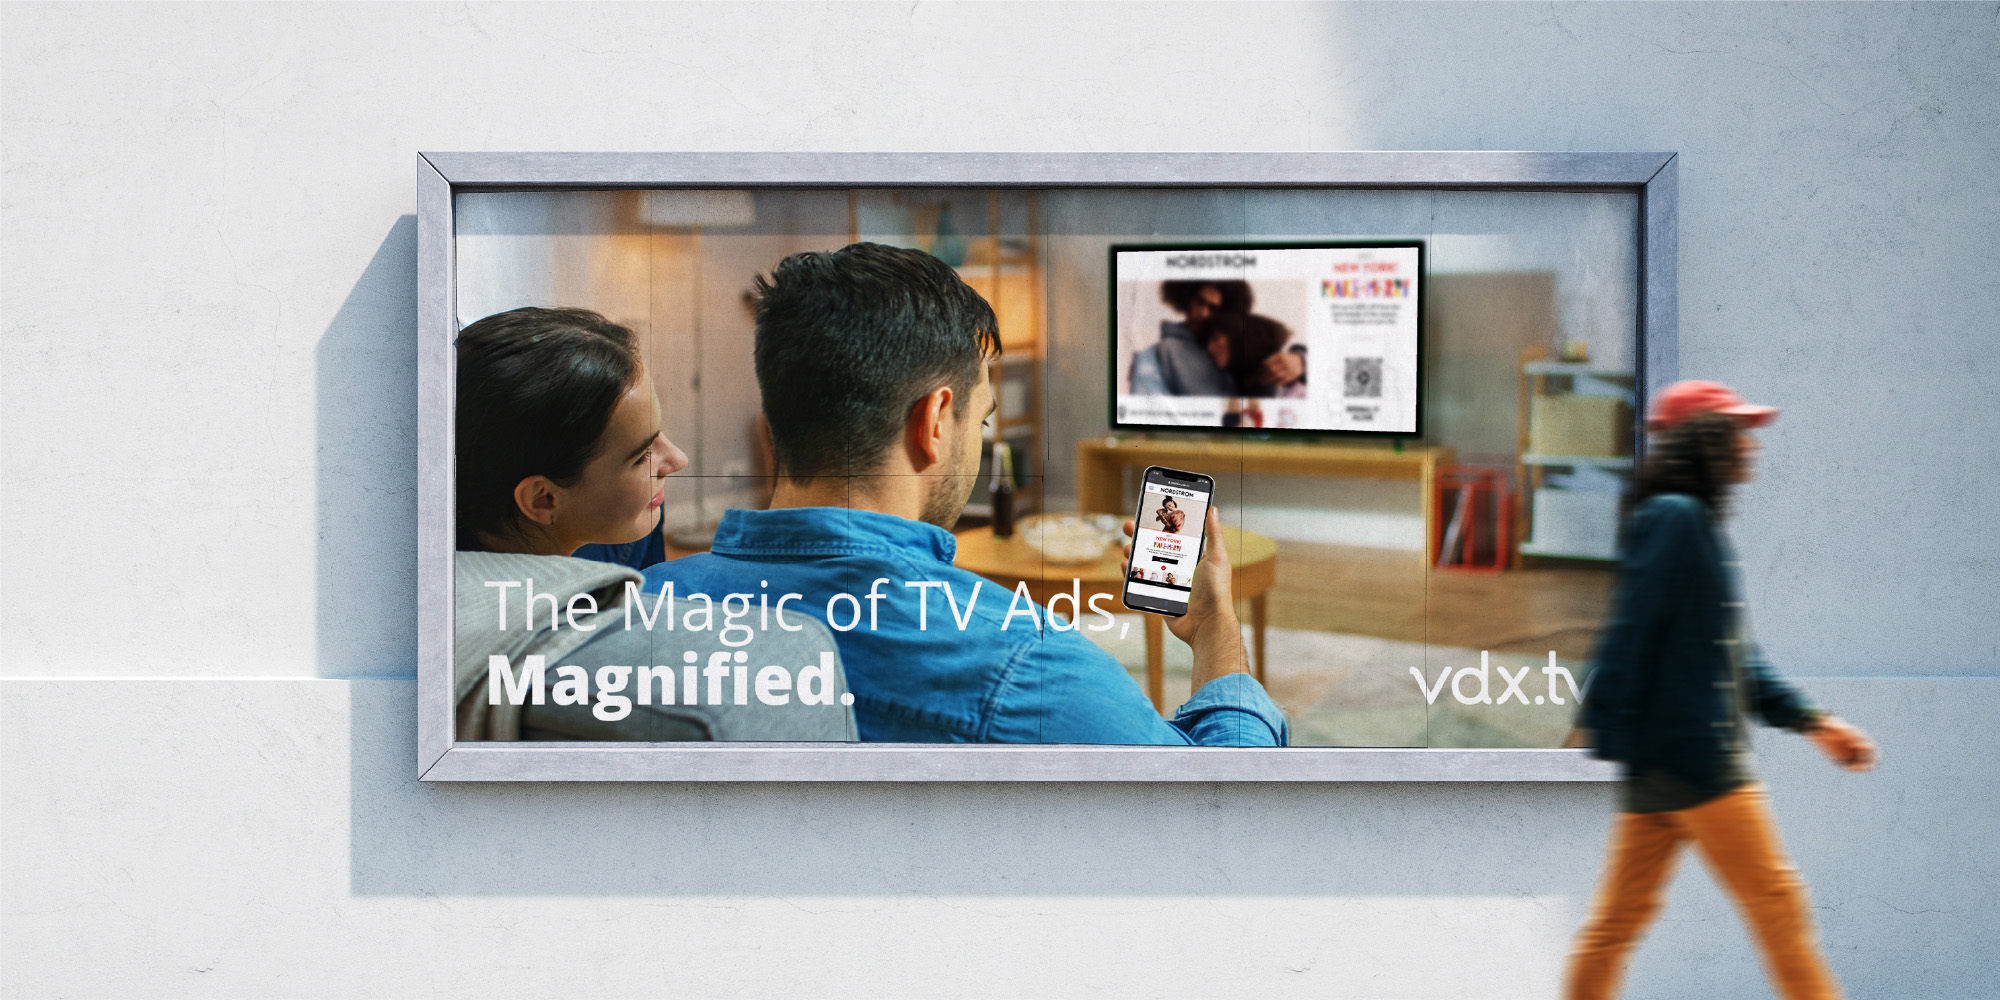 VDX.tv billboard that says "The Magic of TV Ads, Magnified."